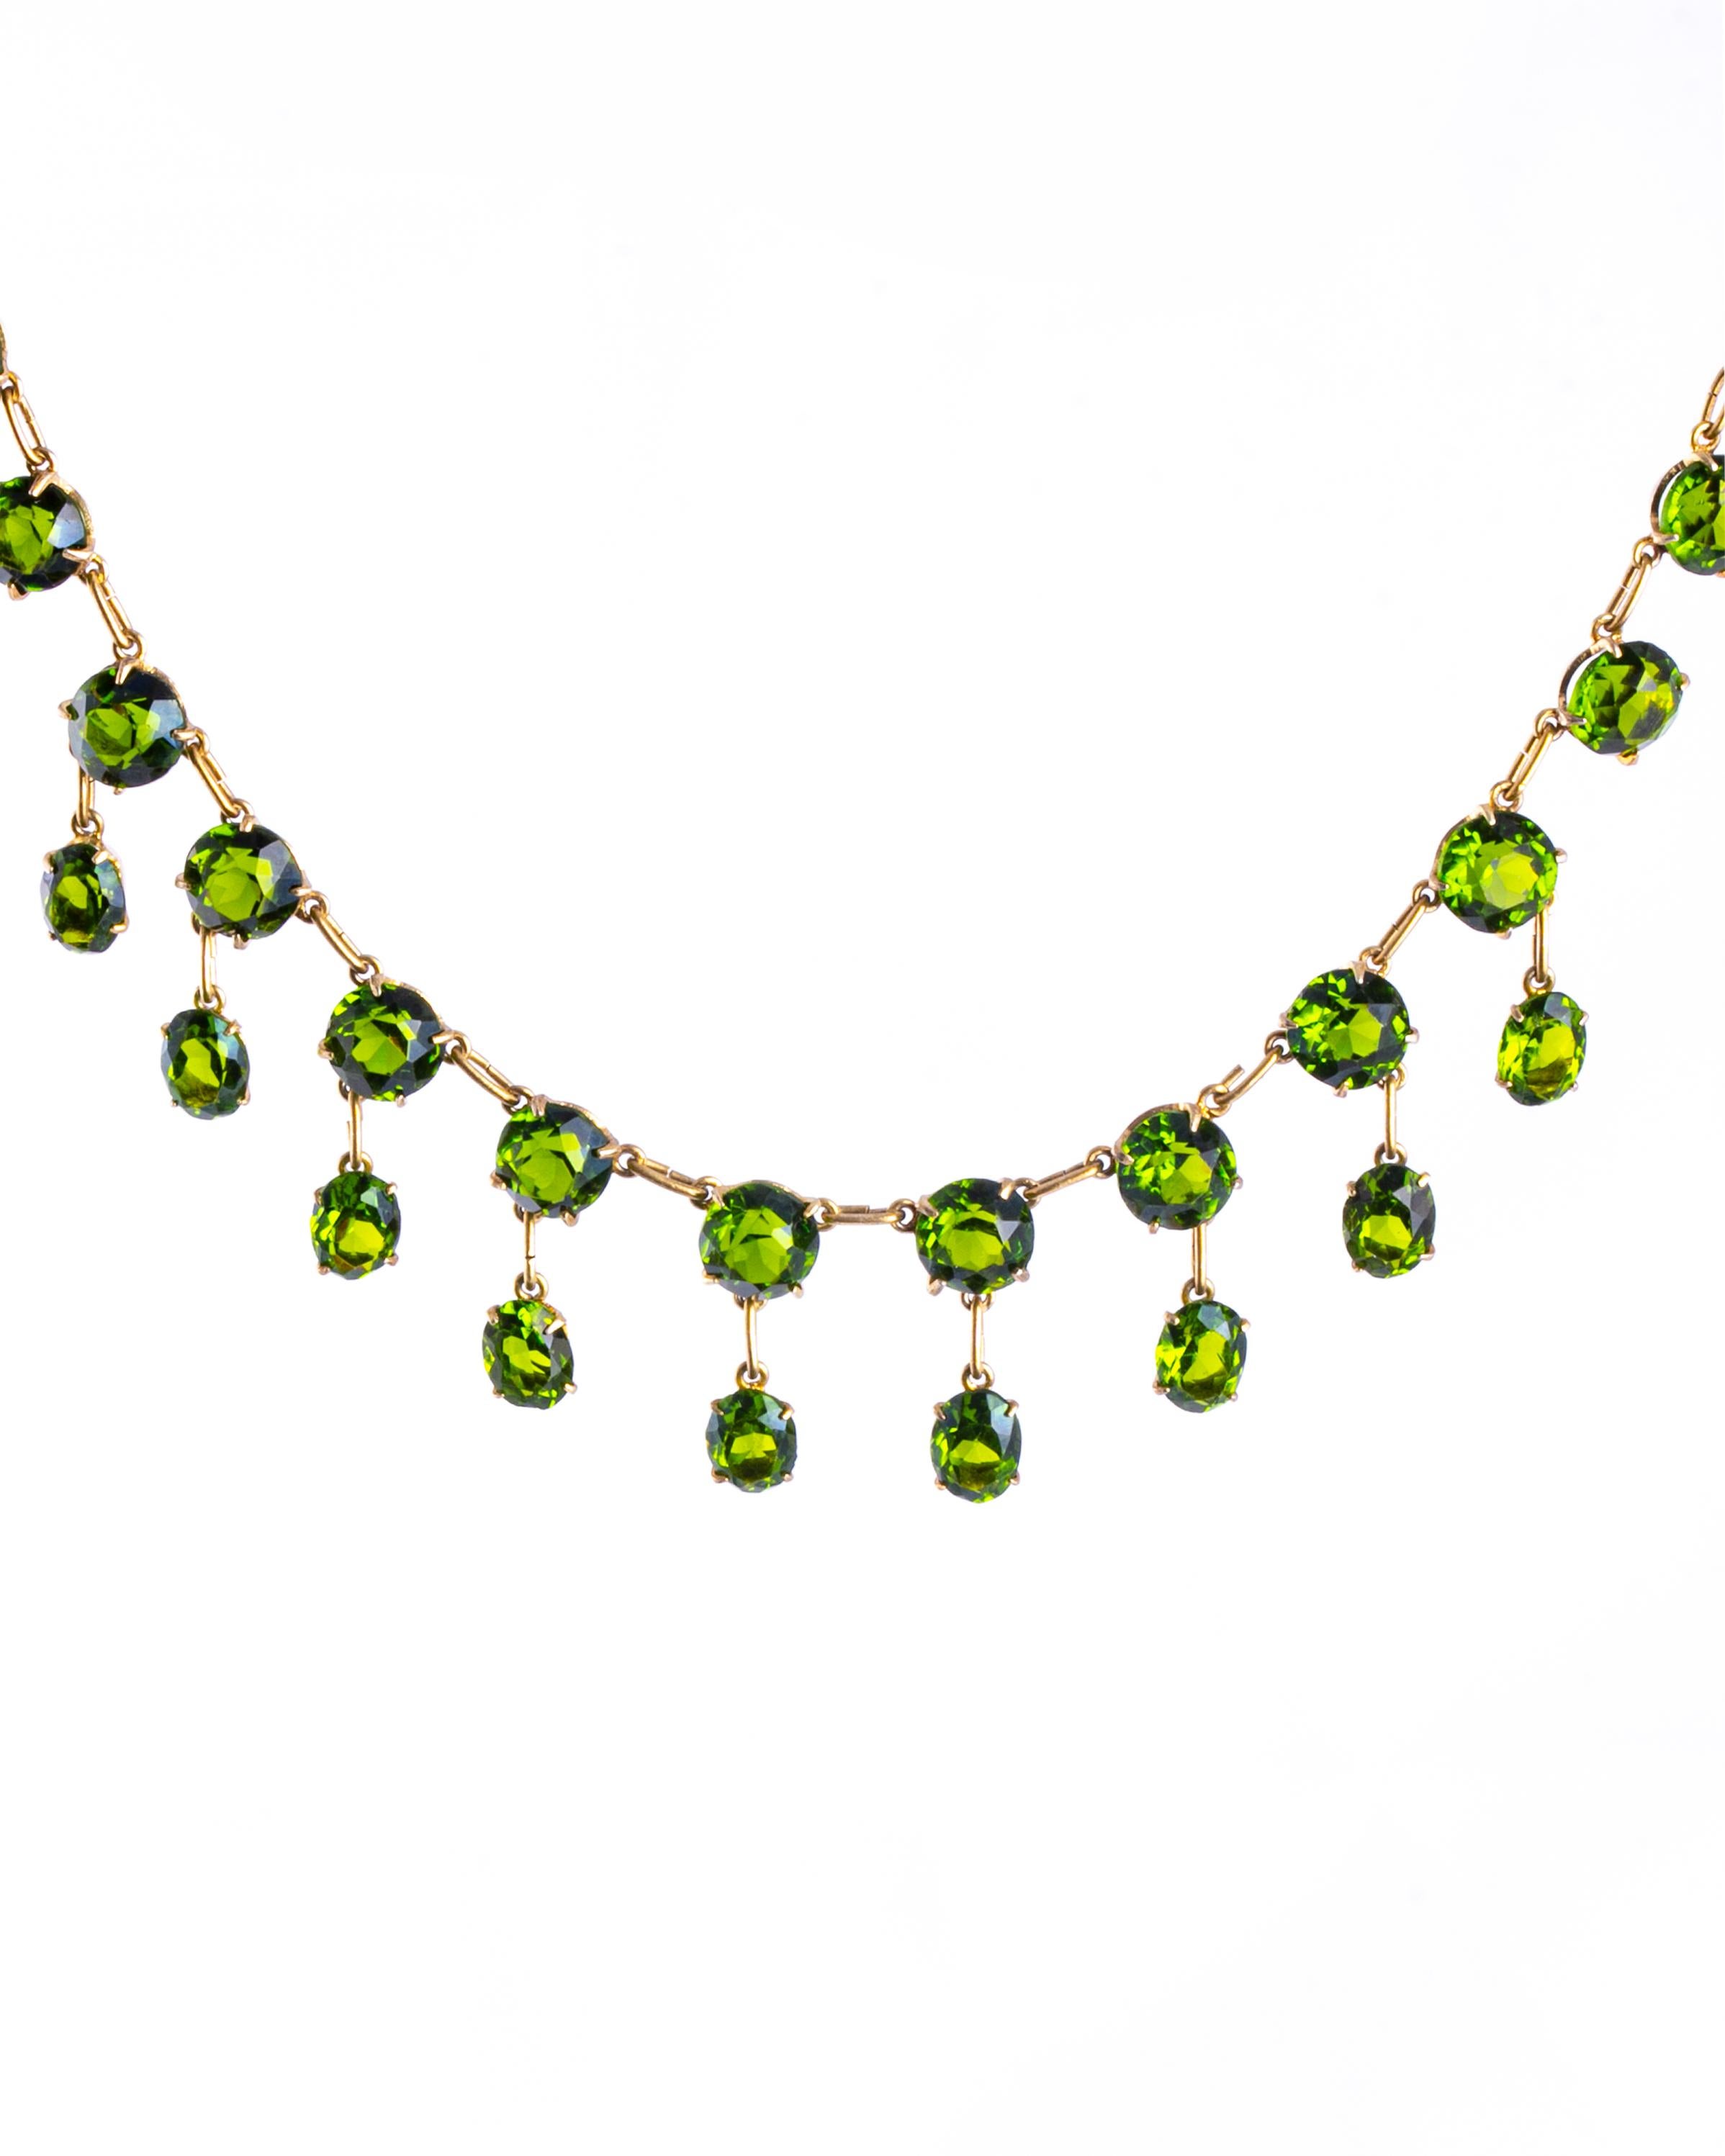 The green stones in this necklace are bright and have such a sparkle to them. They are set in simple claw settings and linked with delicate chain all modelled in silver gilt. 

Length: 37cm
Fringe Length: 20mm
Stone Diameters: 7.5mm
Fringe Stone